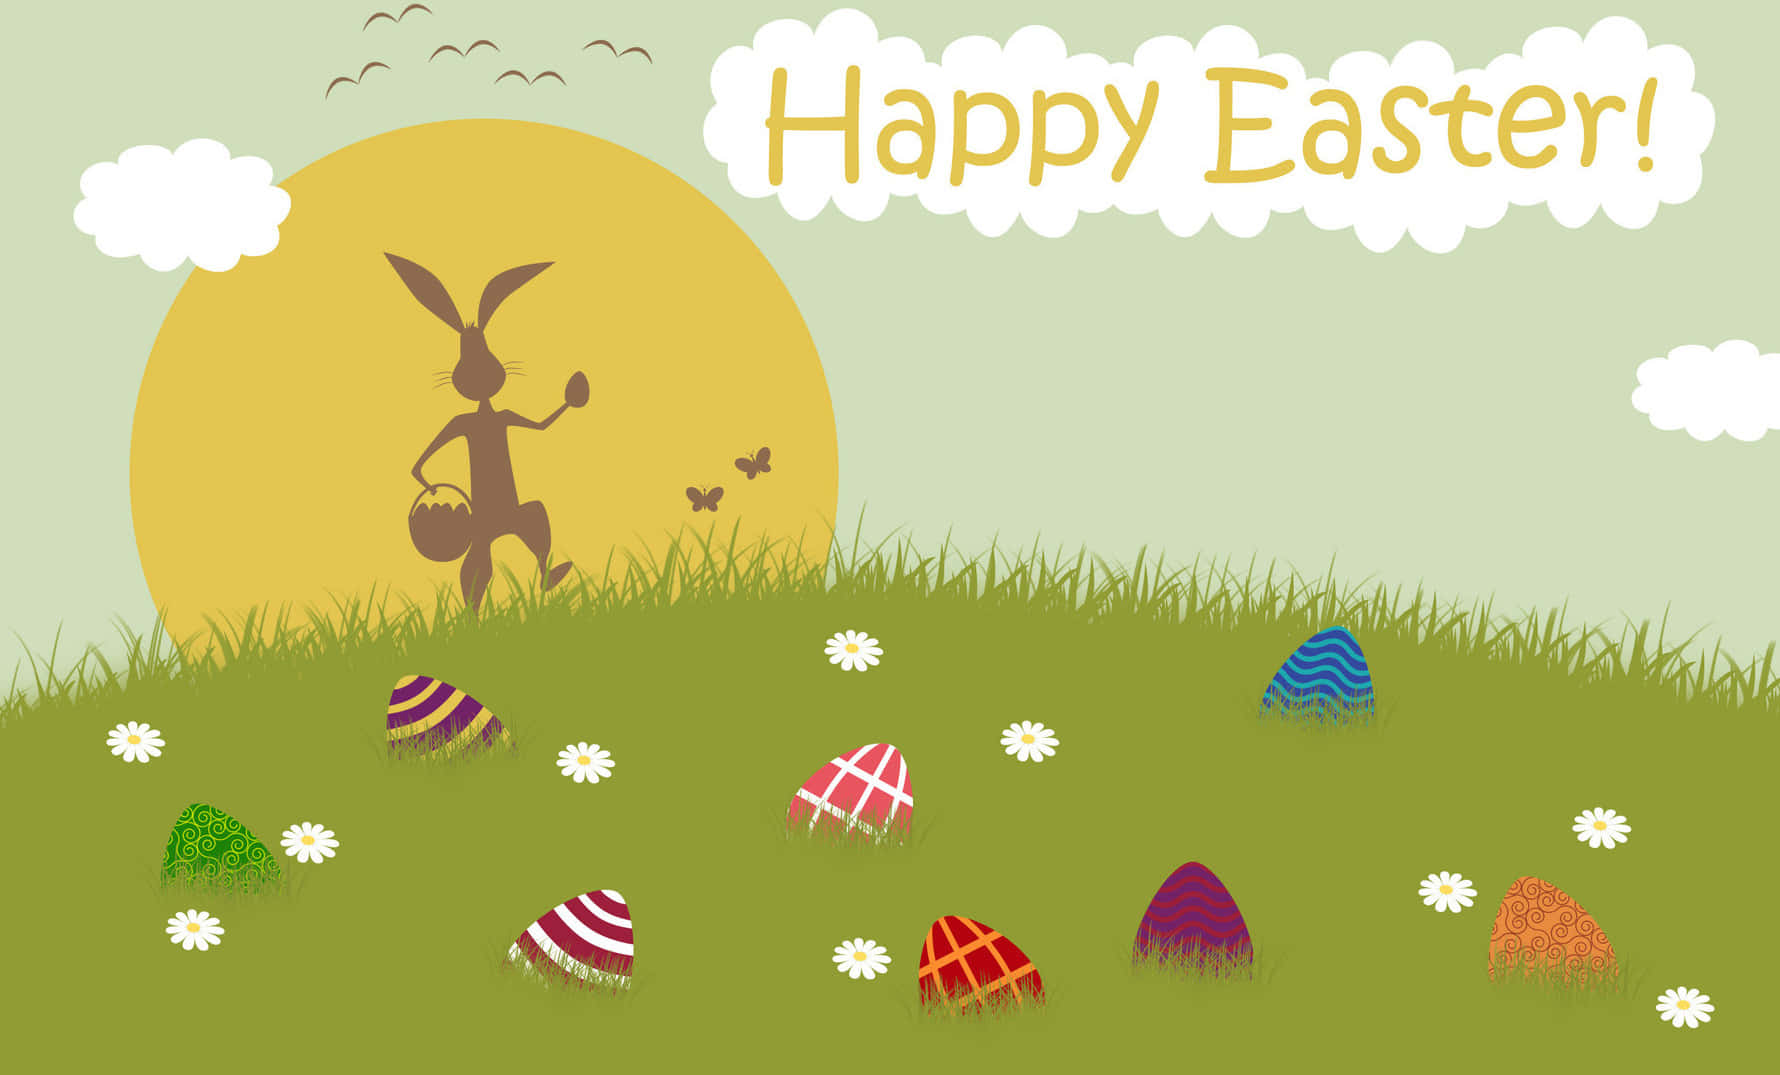 Happy Easter Card With Bunny And Eggs Wallpaper